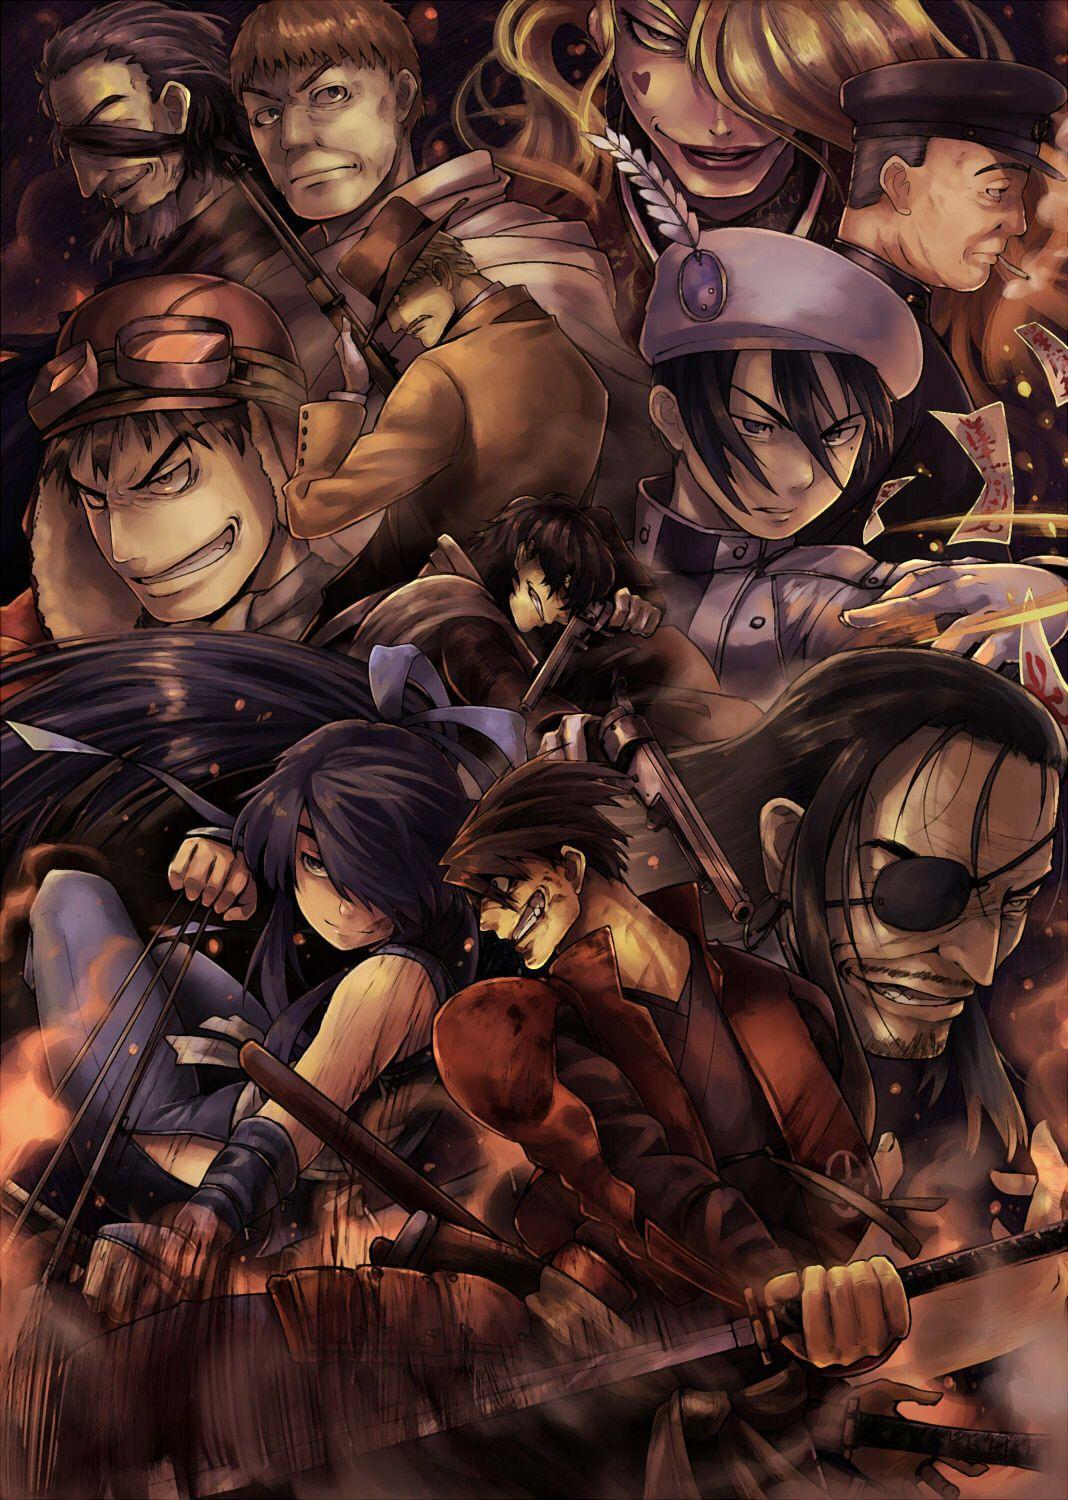 Drifters (Anime) HD Wallpapers and Backgrounds